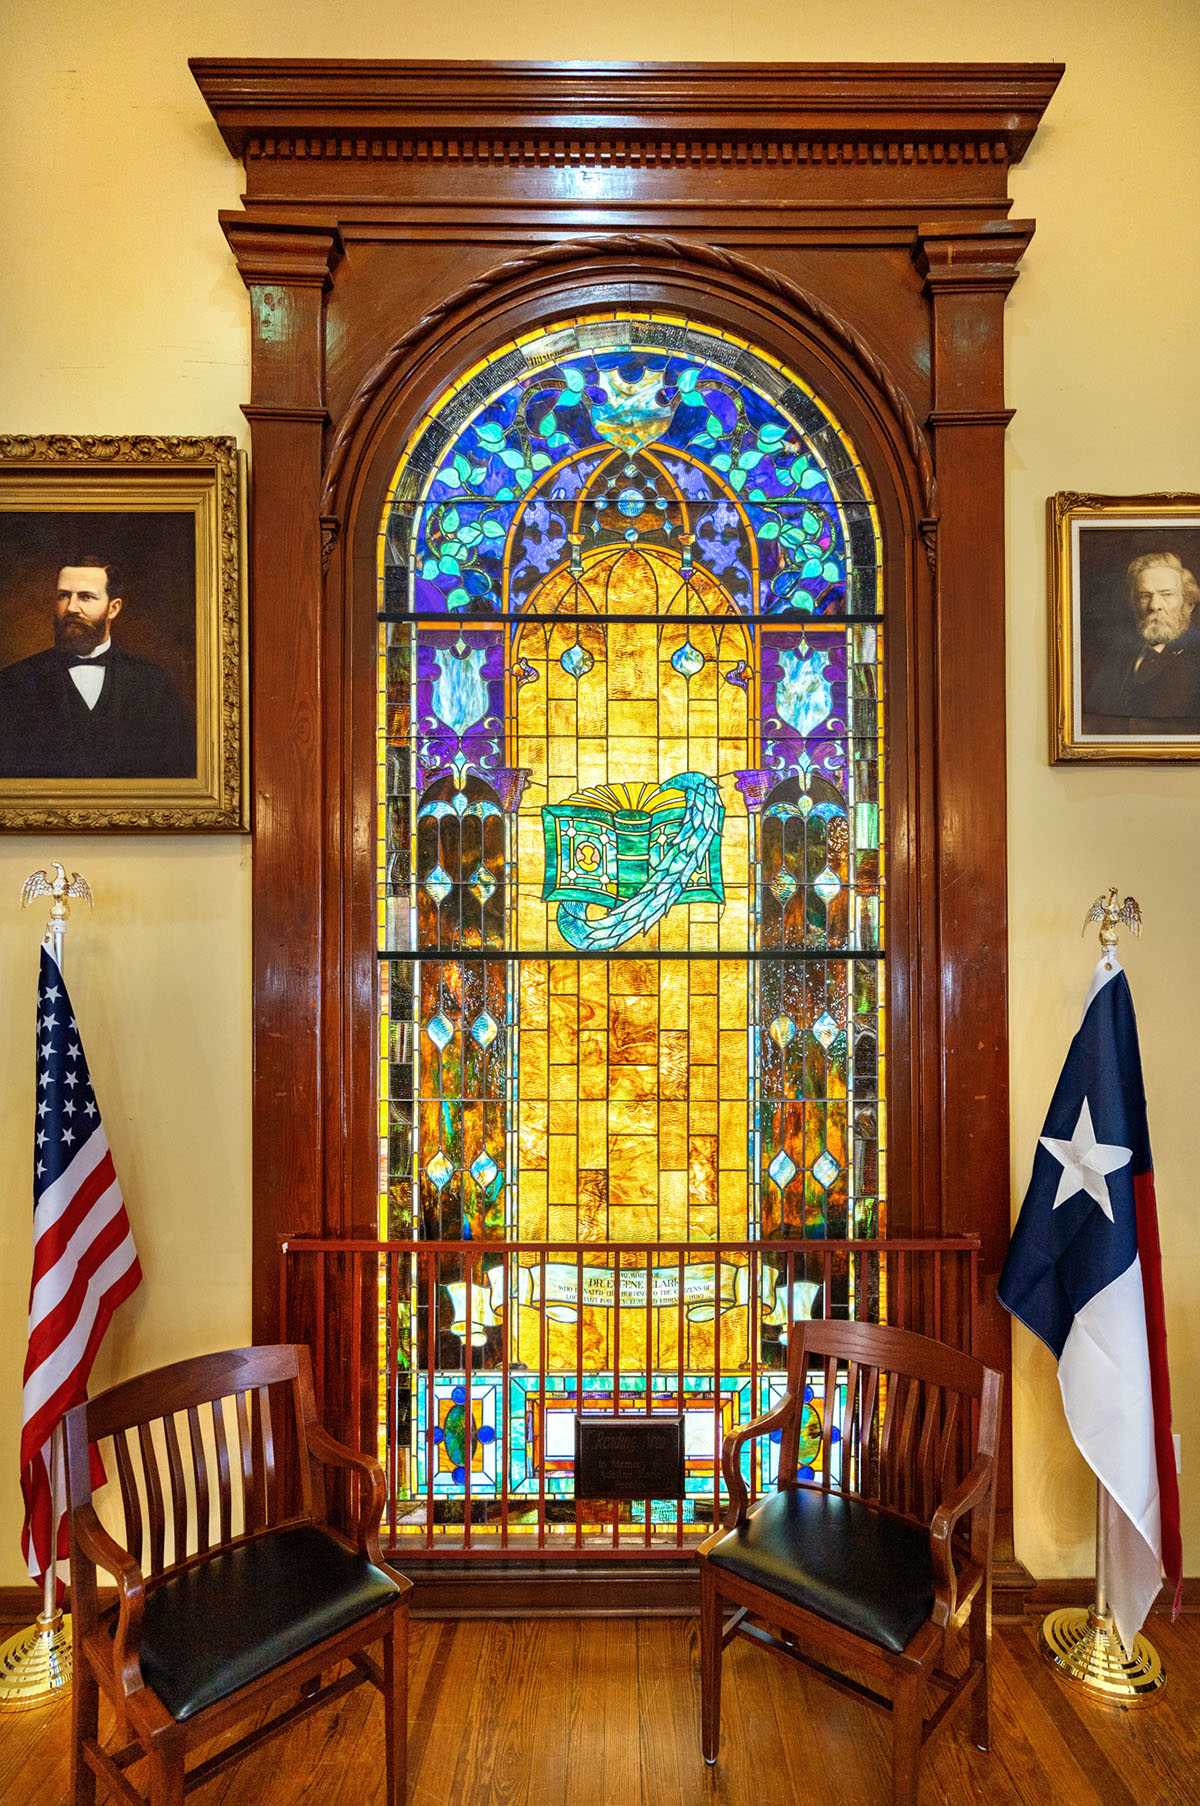 A stained glass window behind United States and Texas flags